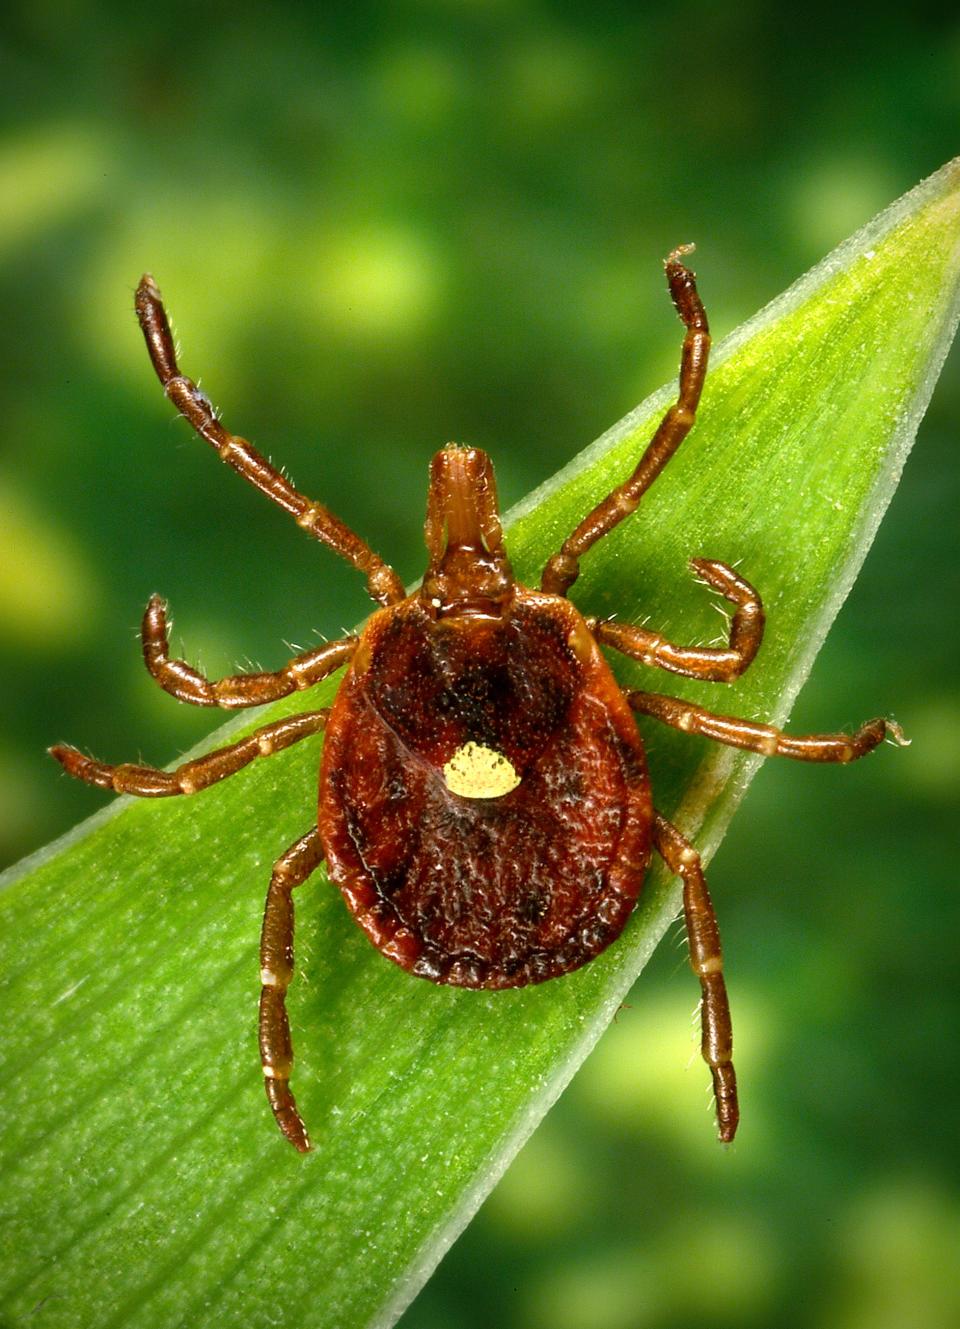 This photograph depicted a dorsal view of a female lone star tick.